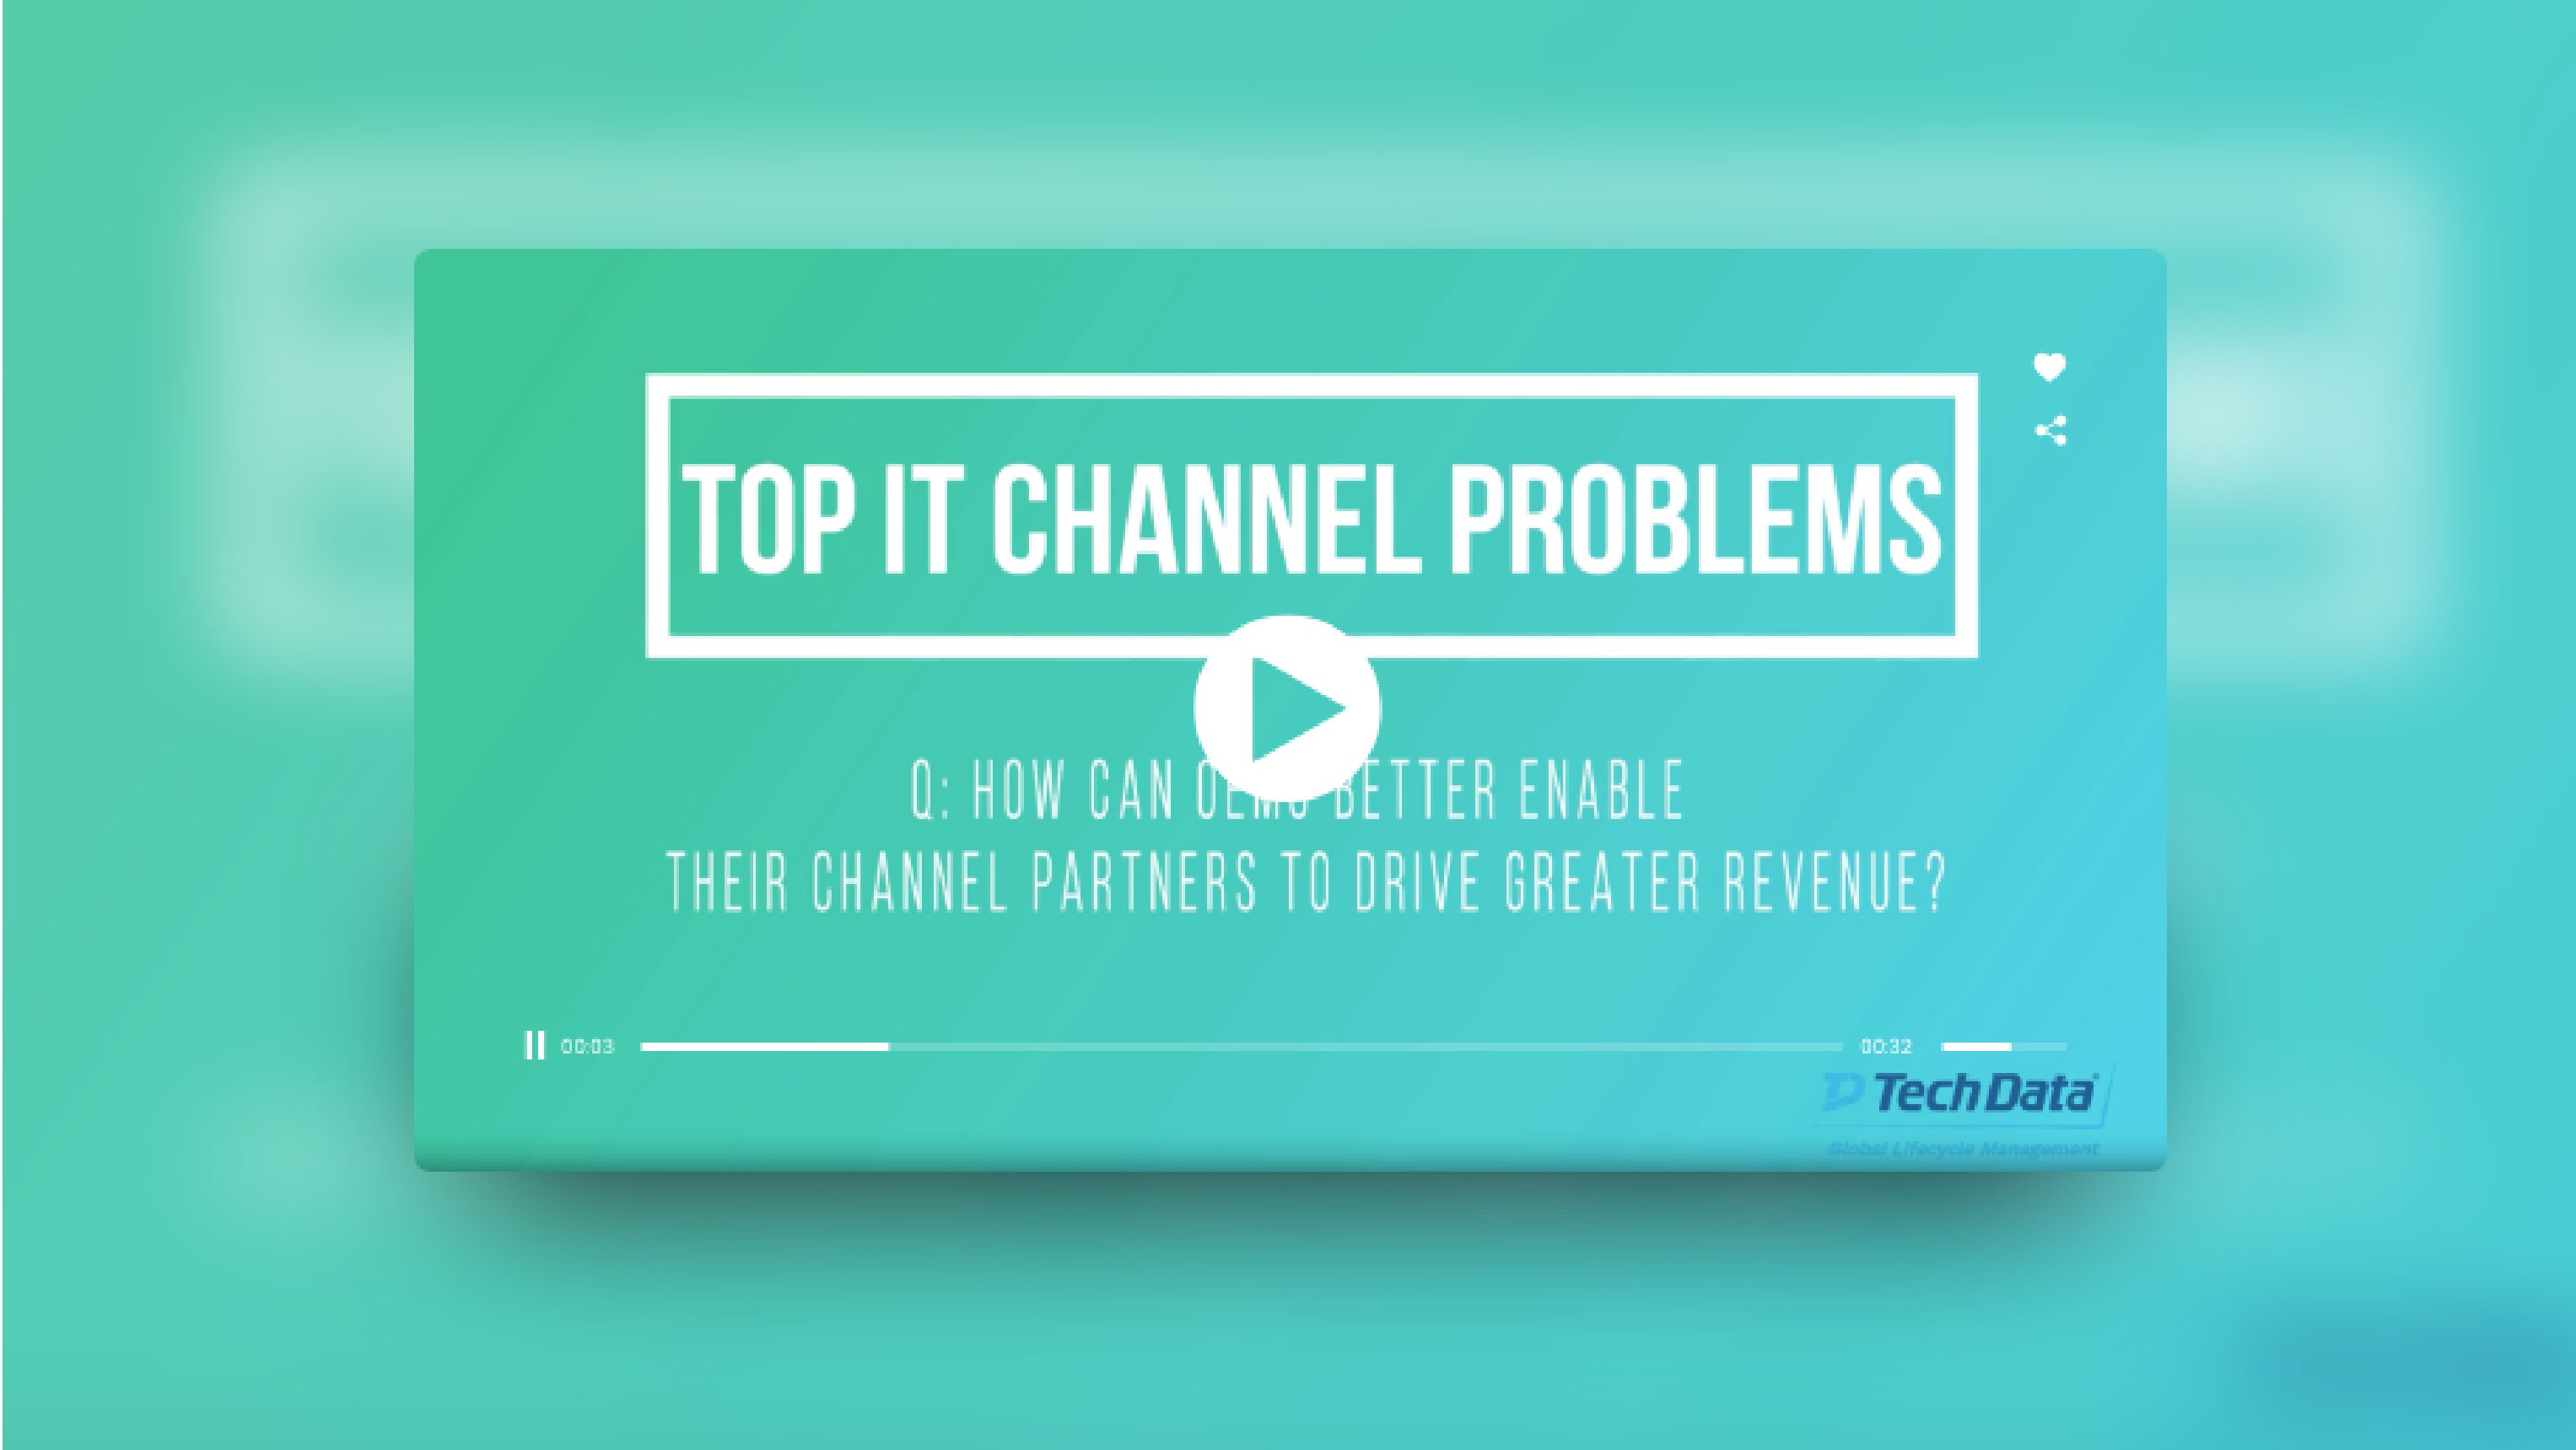 Top IT Channel Problems: Revenue and Share Growth